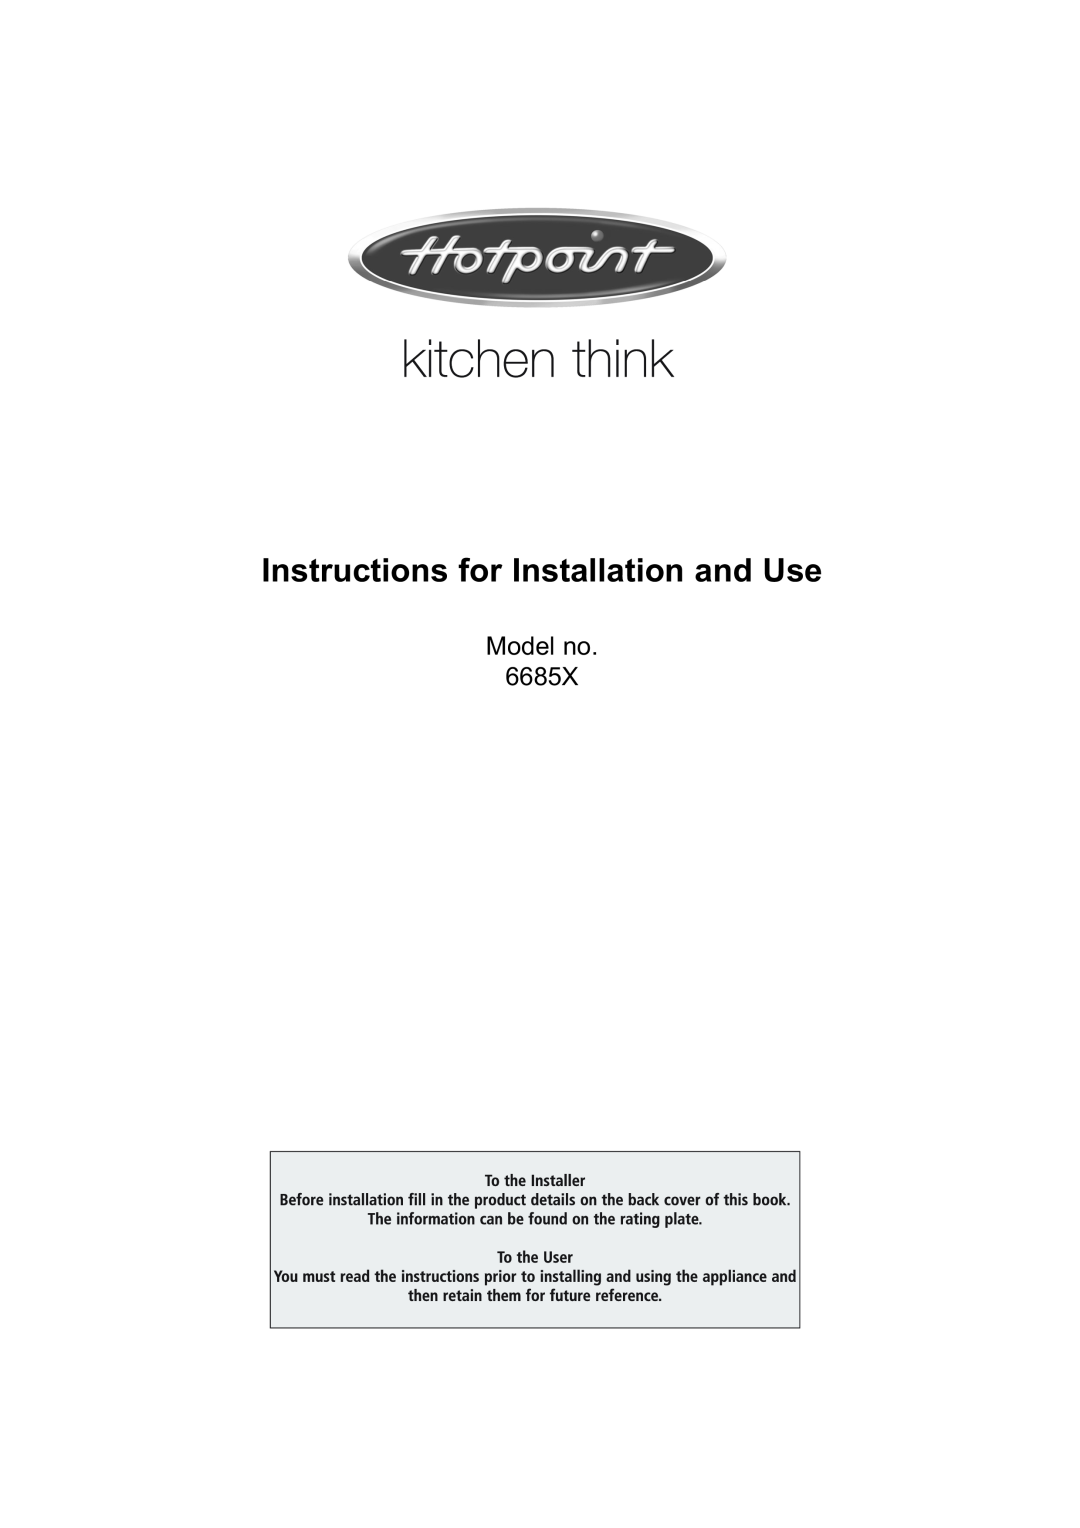 Hotpoint manual Instructions for Installation and Use, Model no 6685X 